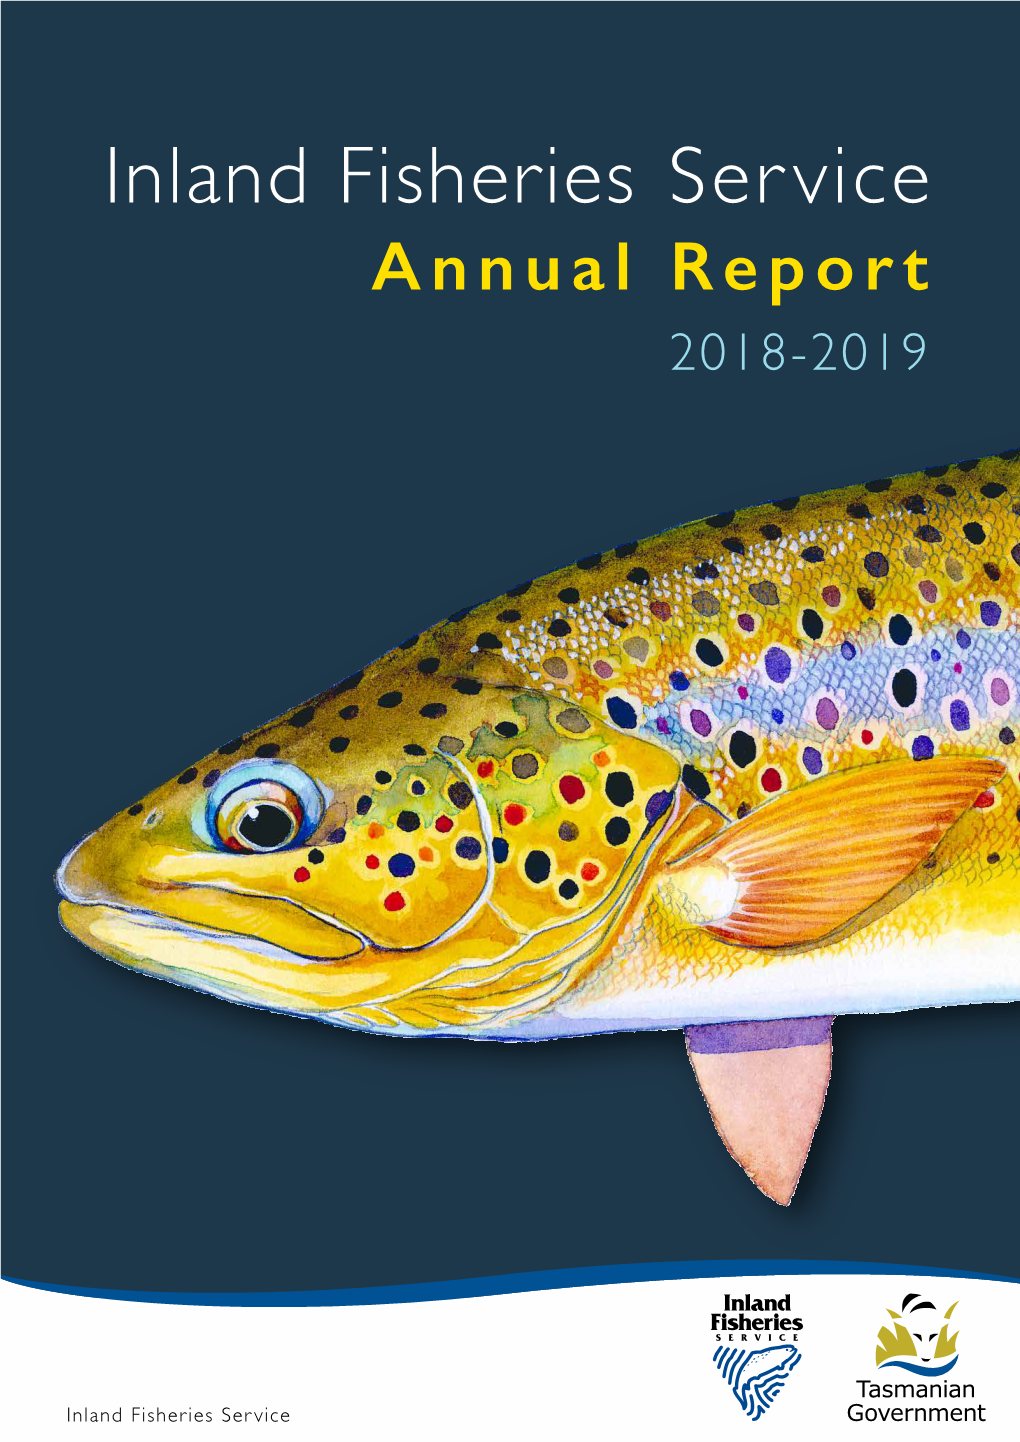 Inland Fisheries Service Annual Report 2018-2019